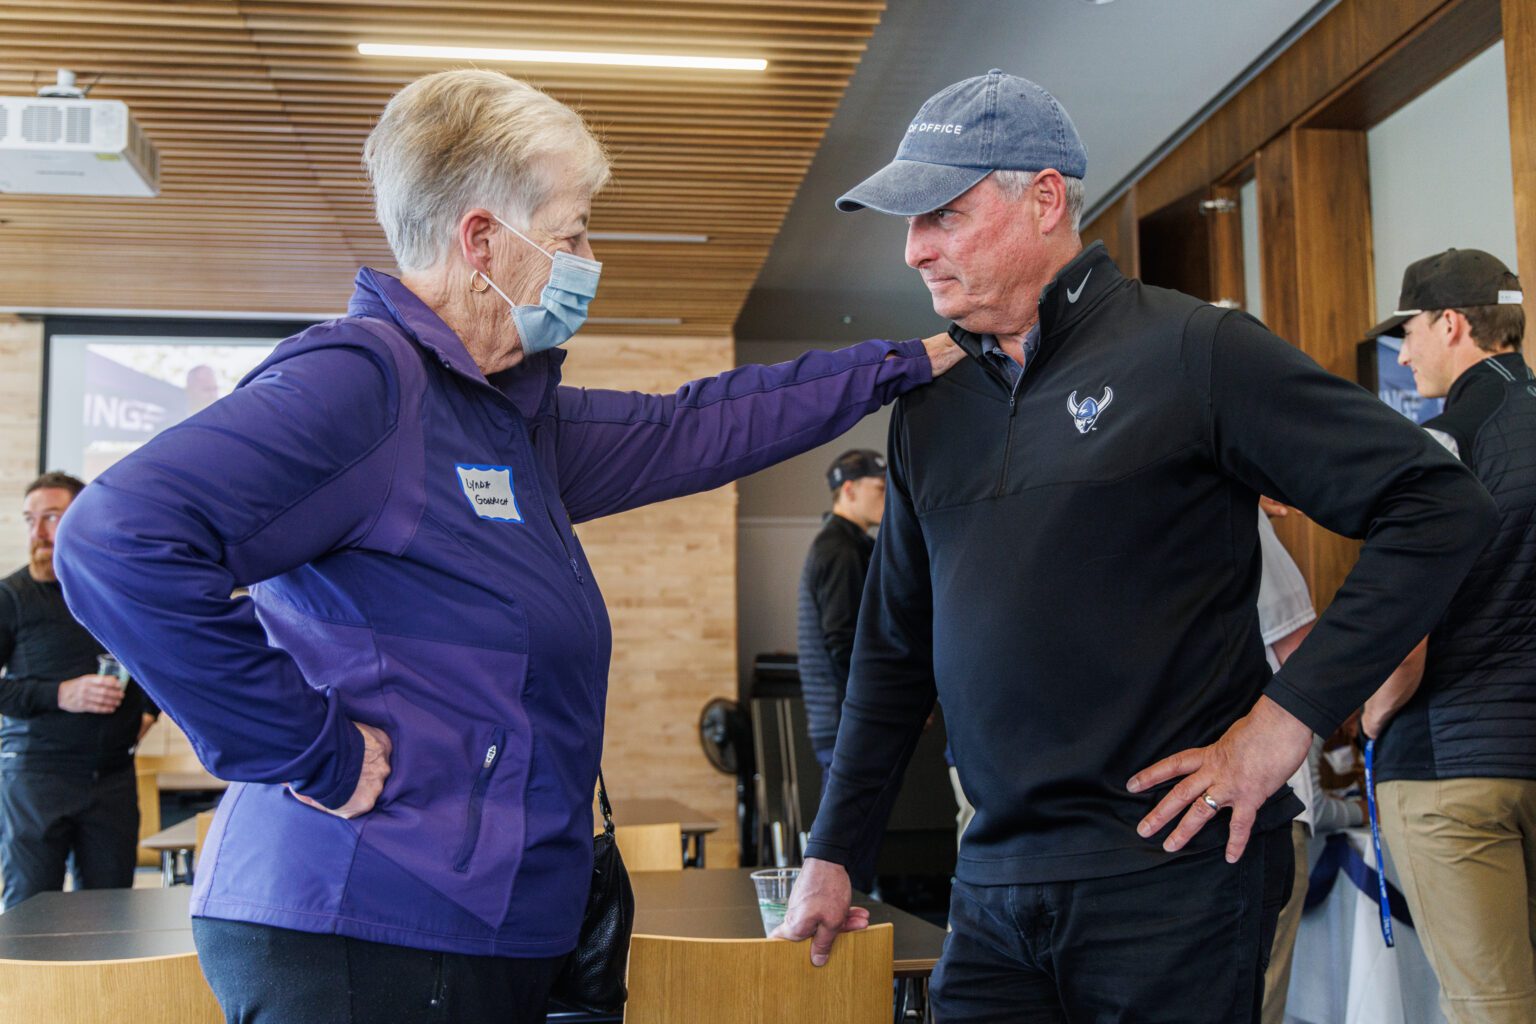 Former athletic director Lynda Goodrich puts a hand on the shoulder of now-retired Western Washington University athletic director Steve Card March 30 during his retirement celebration in the WWU Athletic Hall of Fame room. Card